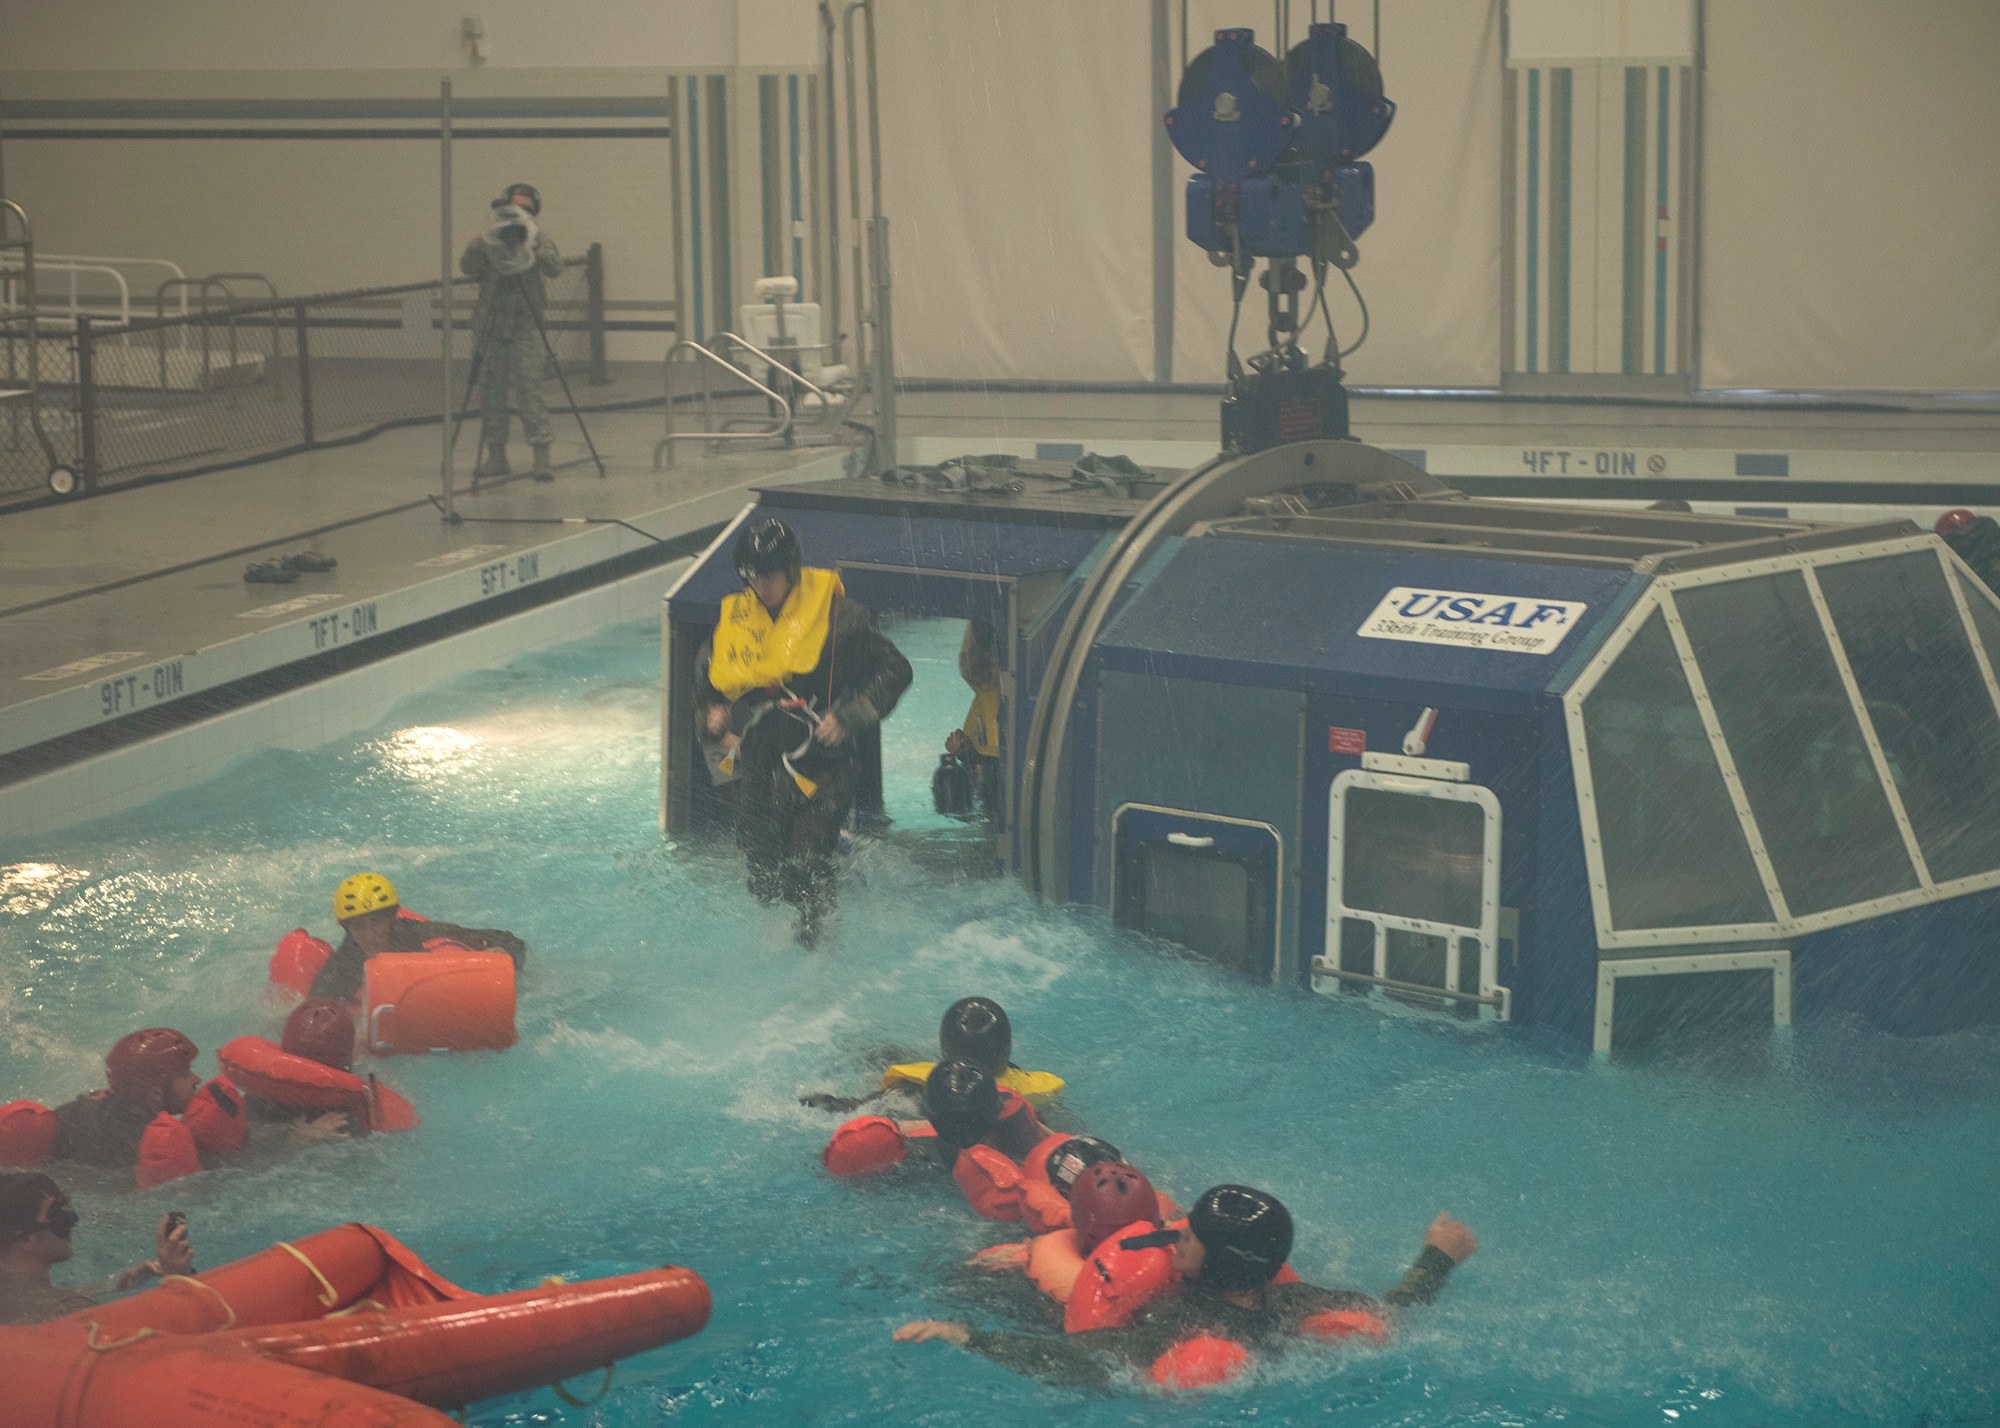 NASA astronauts bail out of a crash simulator during water survival training Feb. 10, 2017, at Fairchild Air Force Base, Wash. The Survival School uses a crane apparatus to simulate an aircraft and is equipped with water, sound and light effects. (U.S. Air Force photo/ Airman 1st Class Ryan Lackey)